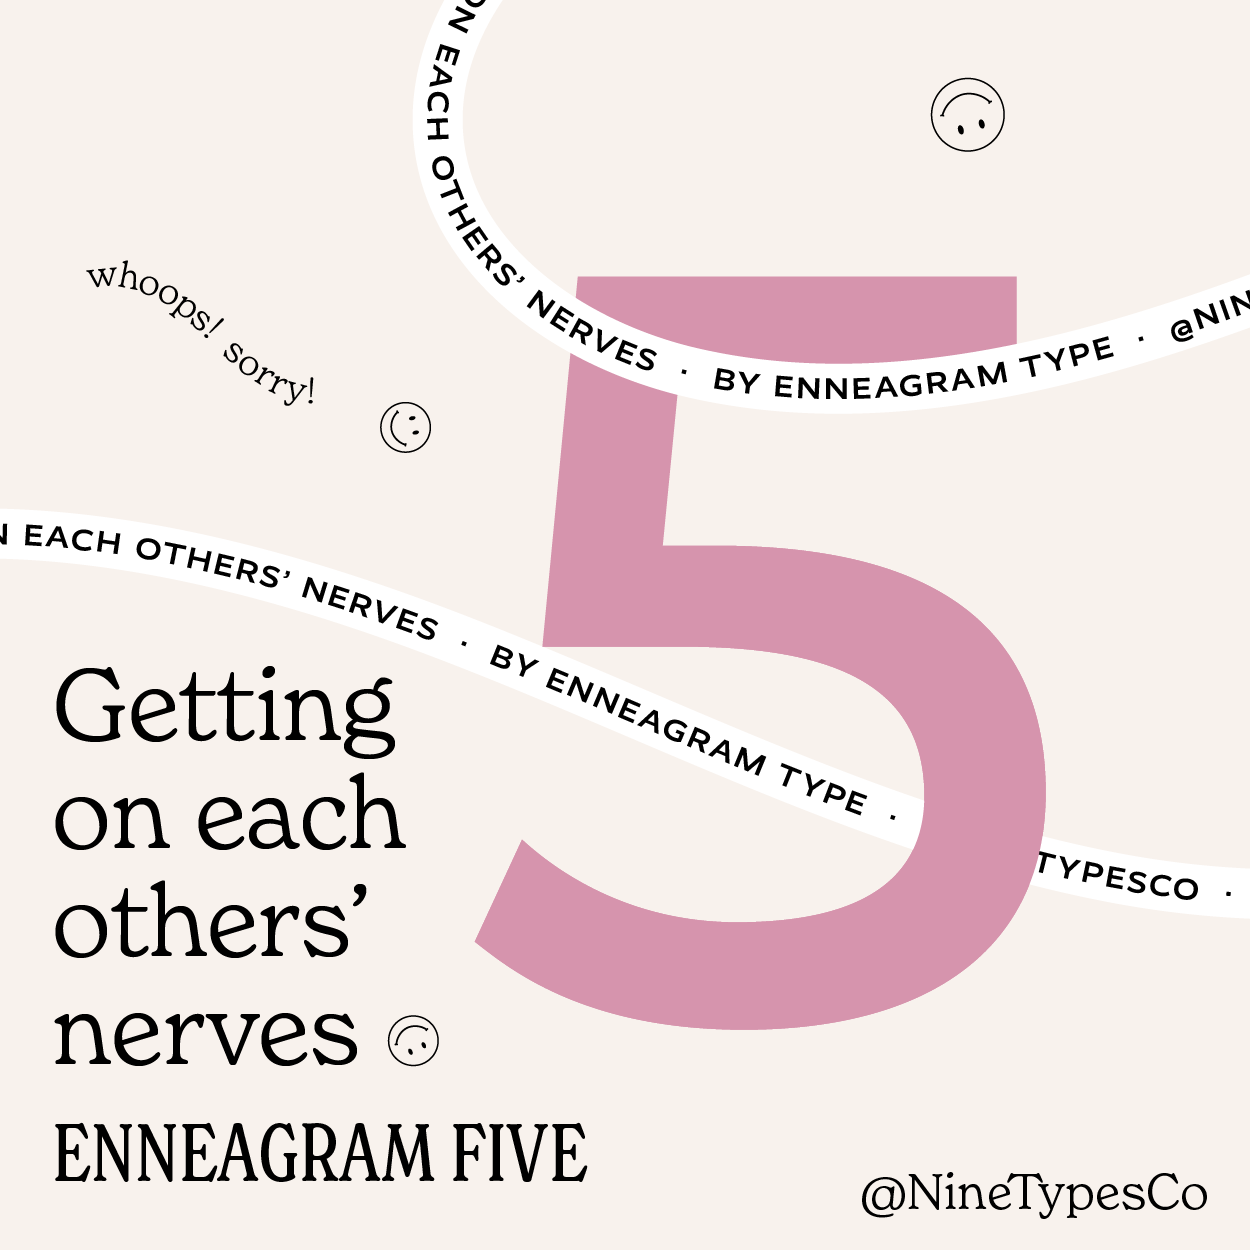 Getting on each others’ nerves by Enneagram TypeEnneagram 5@0.5x.png